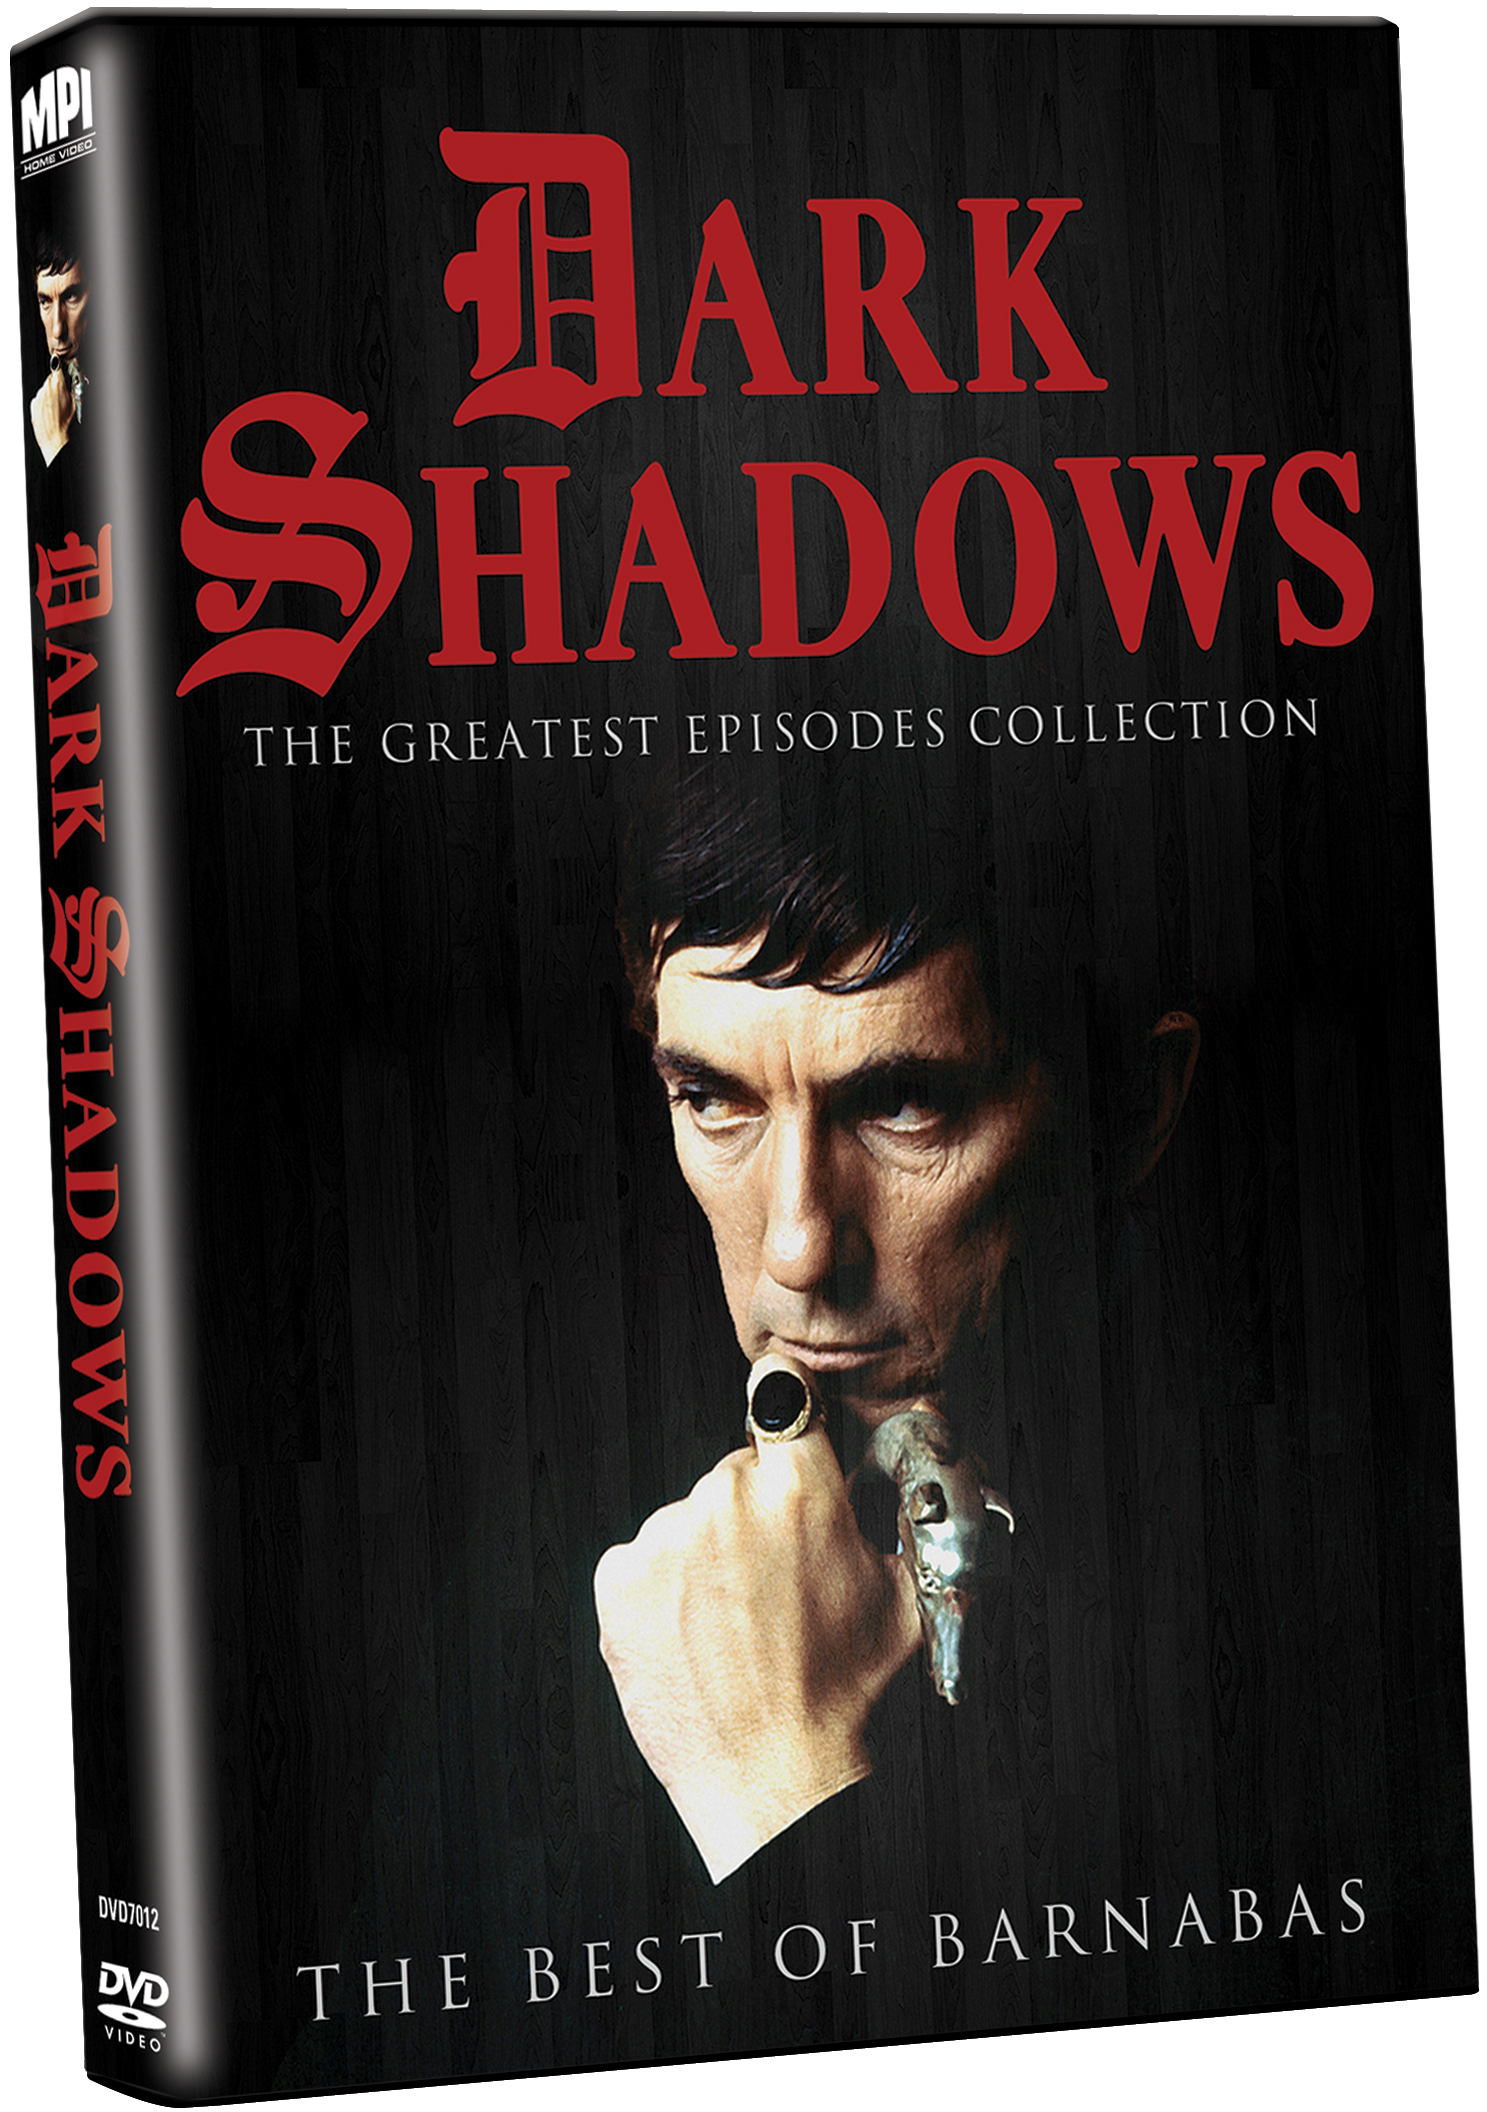 Dark Shadows: The Best of Barnabas and Fan Favorites Available on DVD April 10th